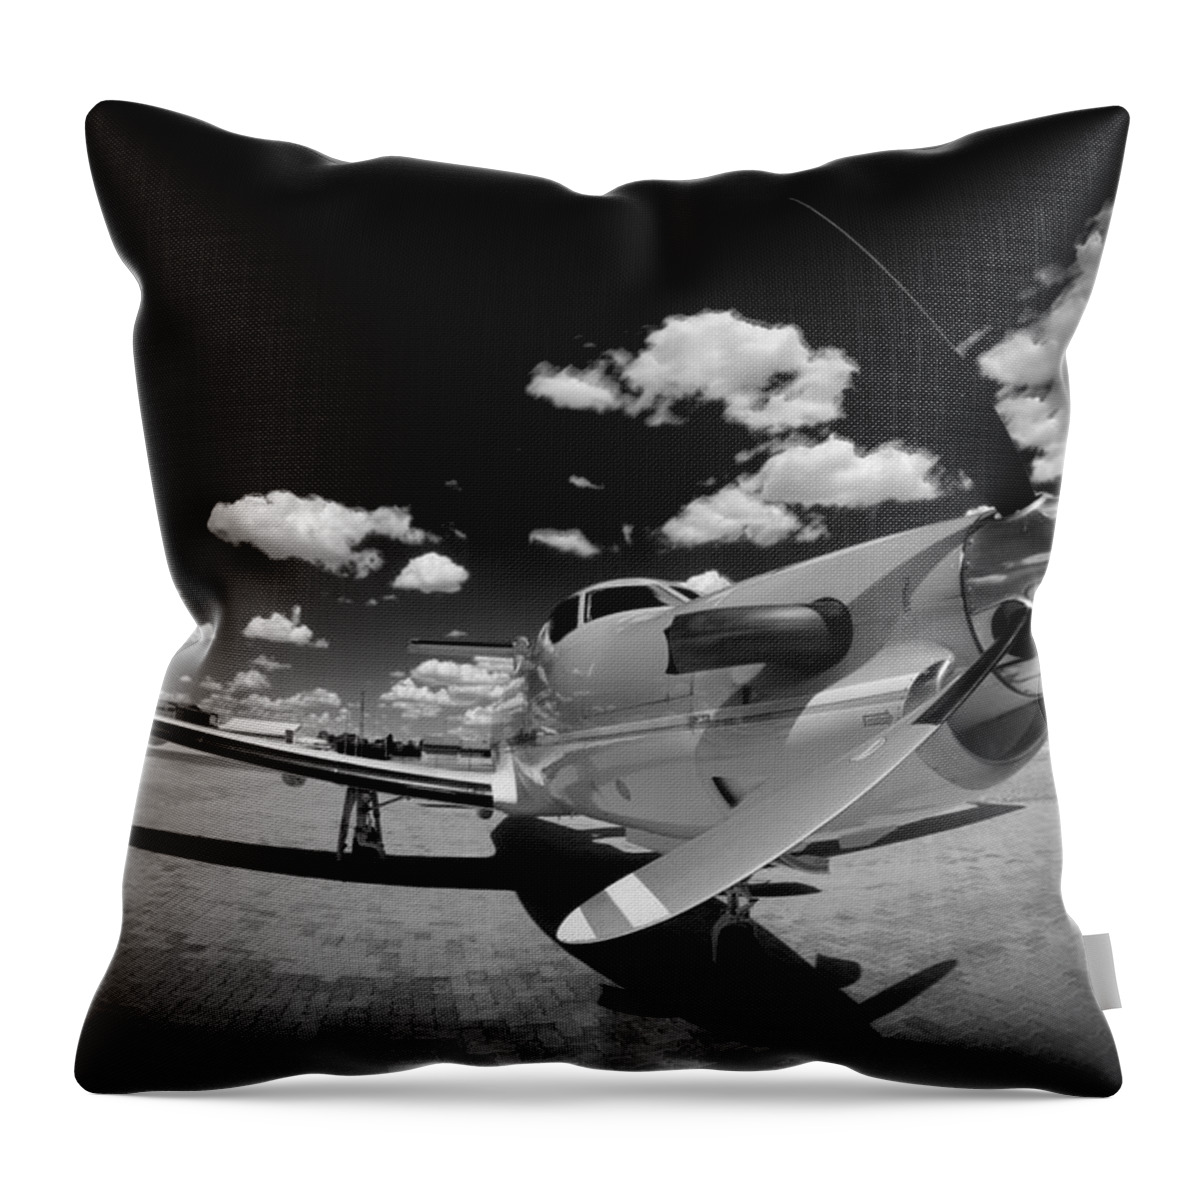 Aviation Throw Pillow featuring the photograph Waiting Blade by Paul Job